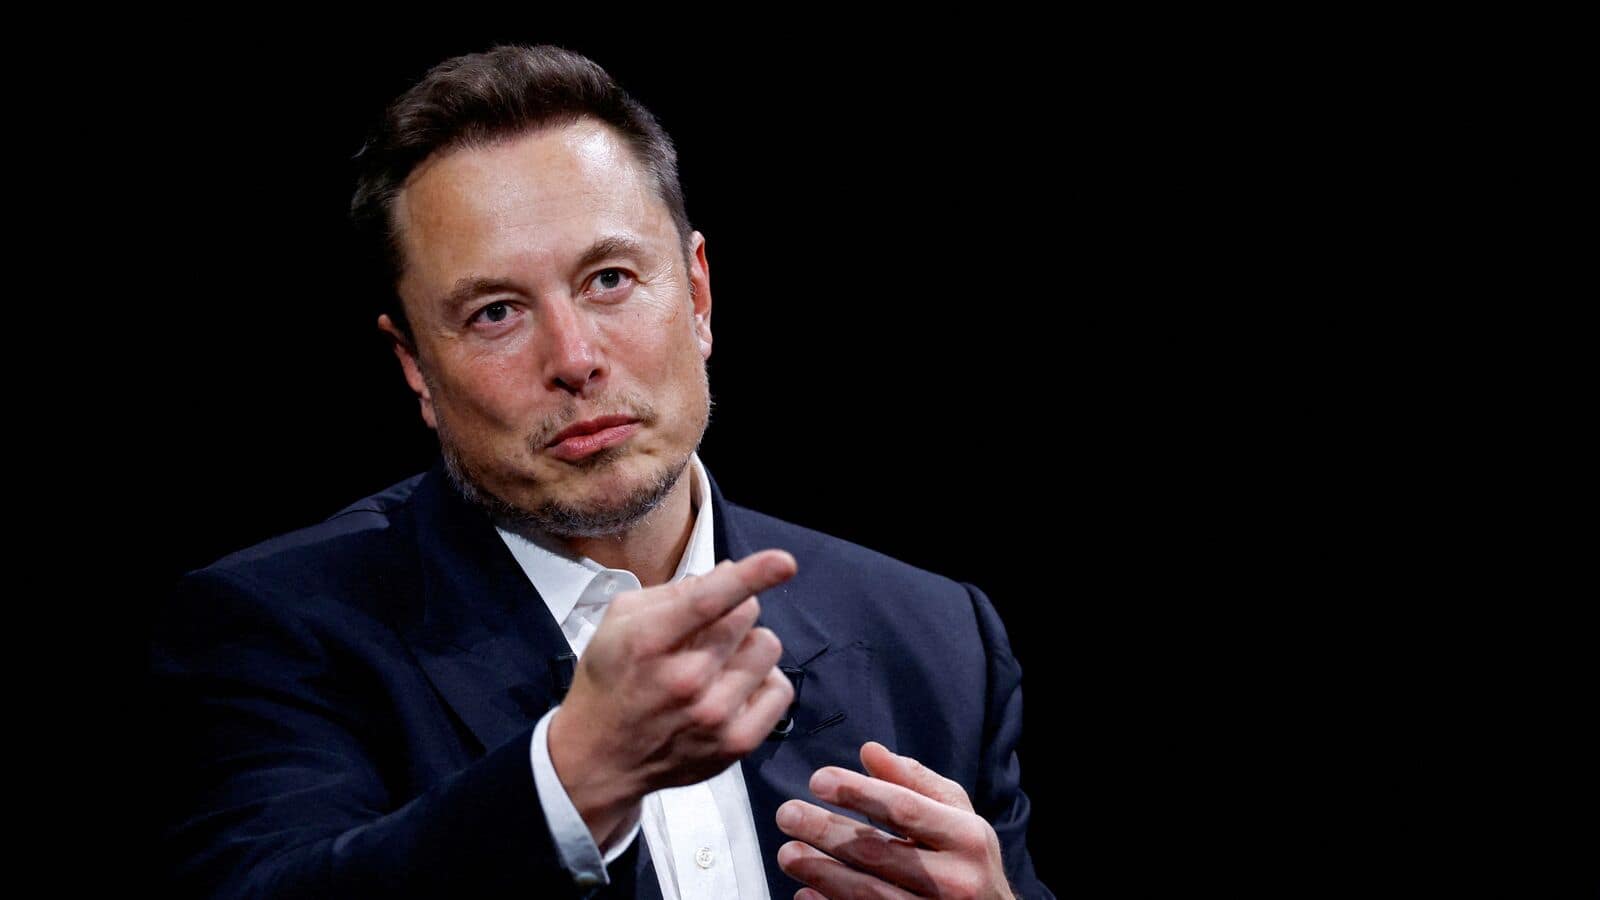 Musk may leave Tesla if $56B pay package not approved